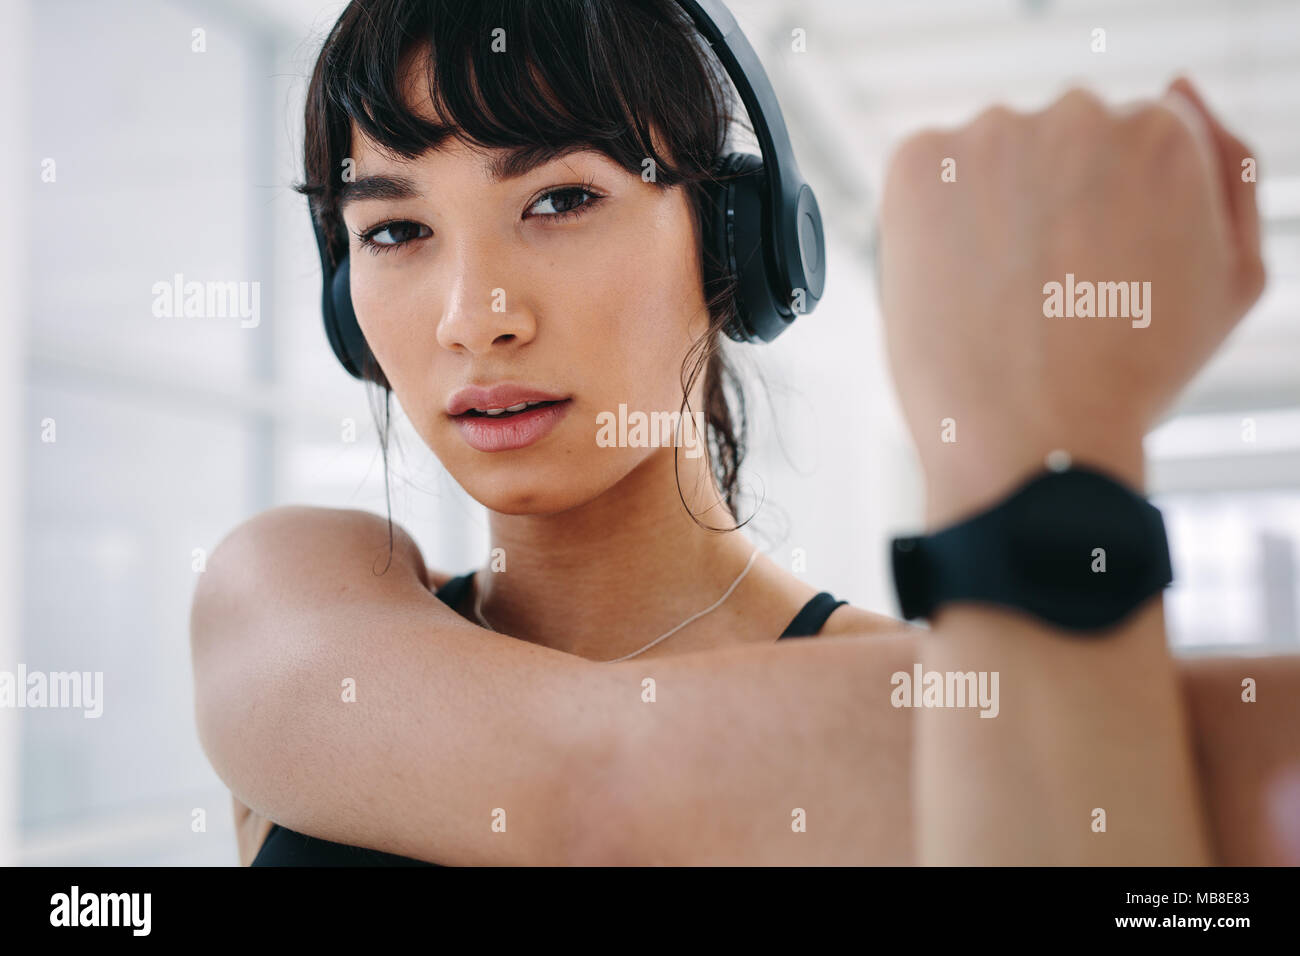 Close up of healthy woman with headphones doing arm stretching exercise. fitness woman stretching hands at health club. Stock Photo